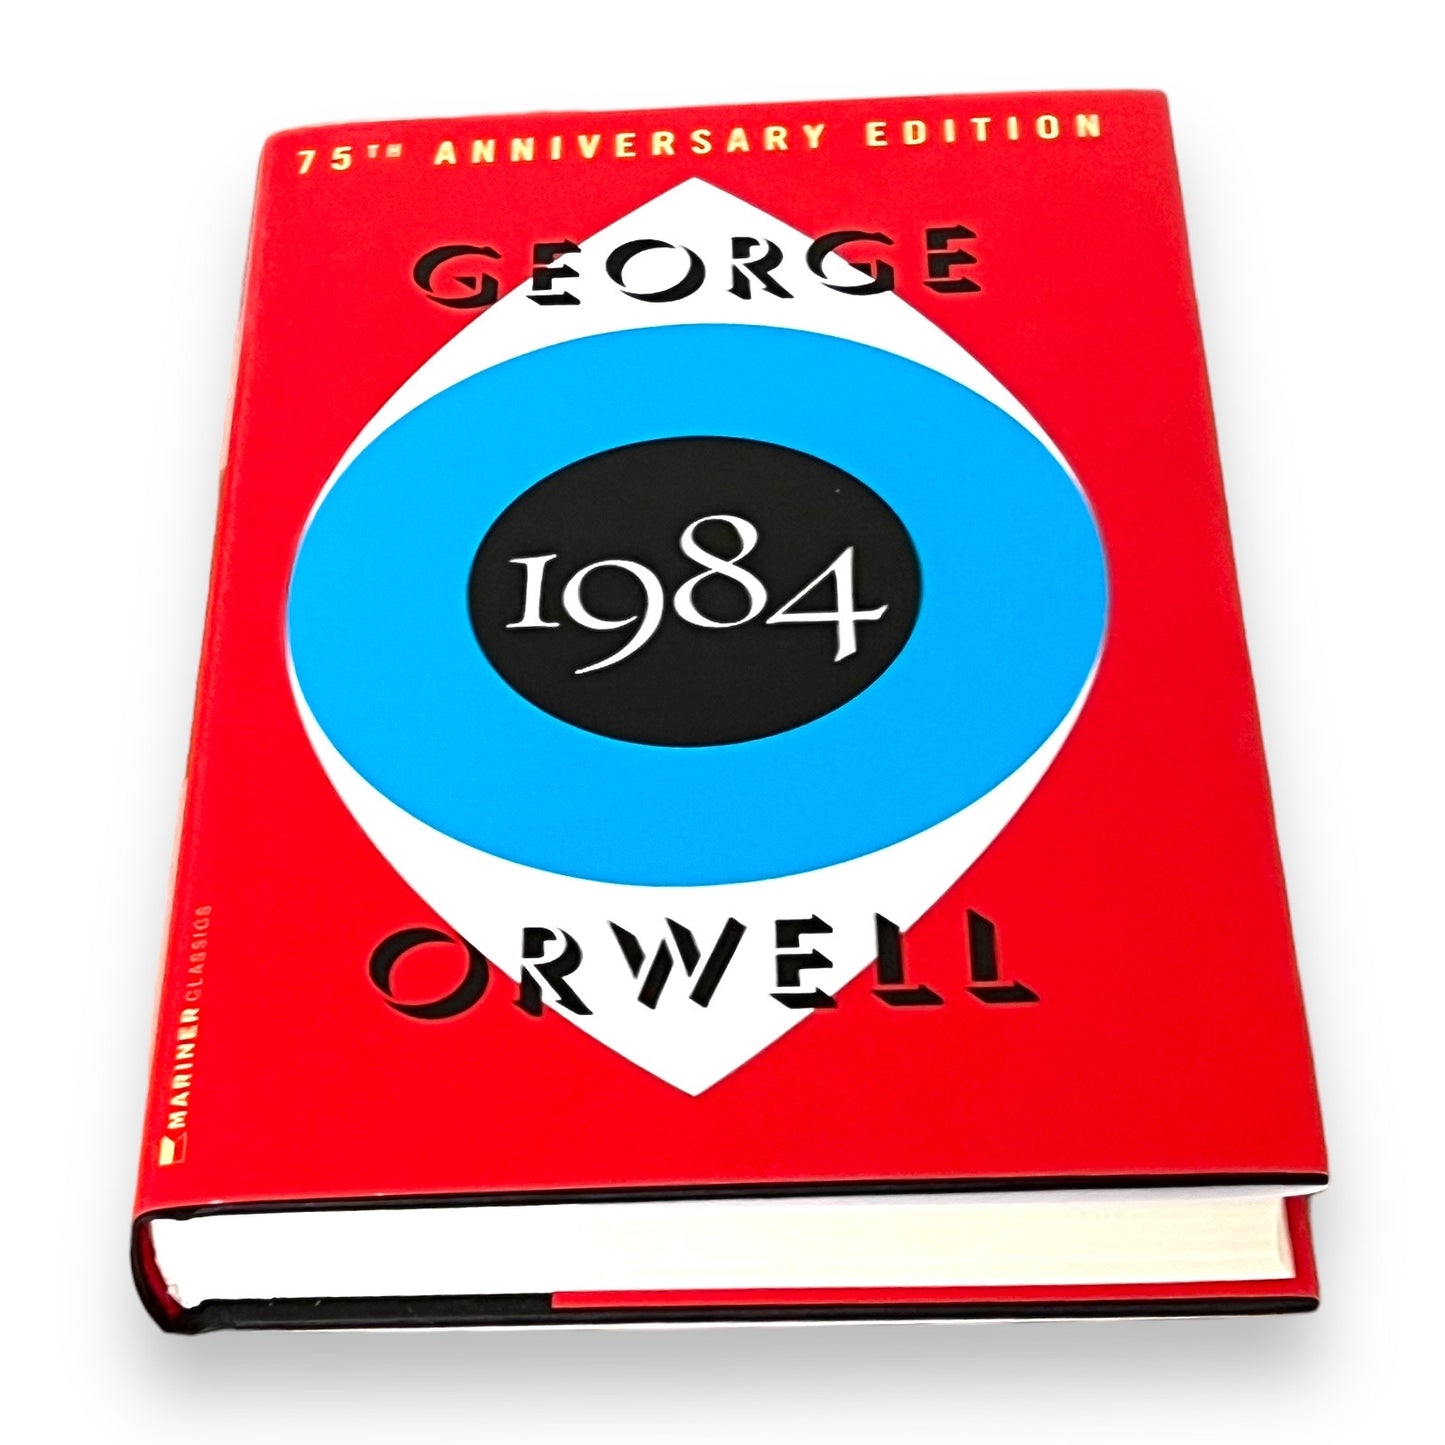 1984 Nineteen Eighty-Four by GEORGE ORWELL - Hardcover - Best Seller - Classic Book